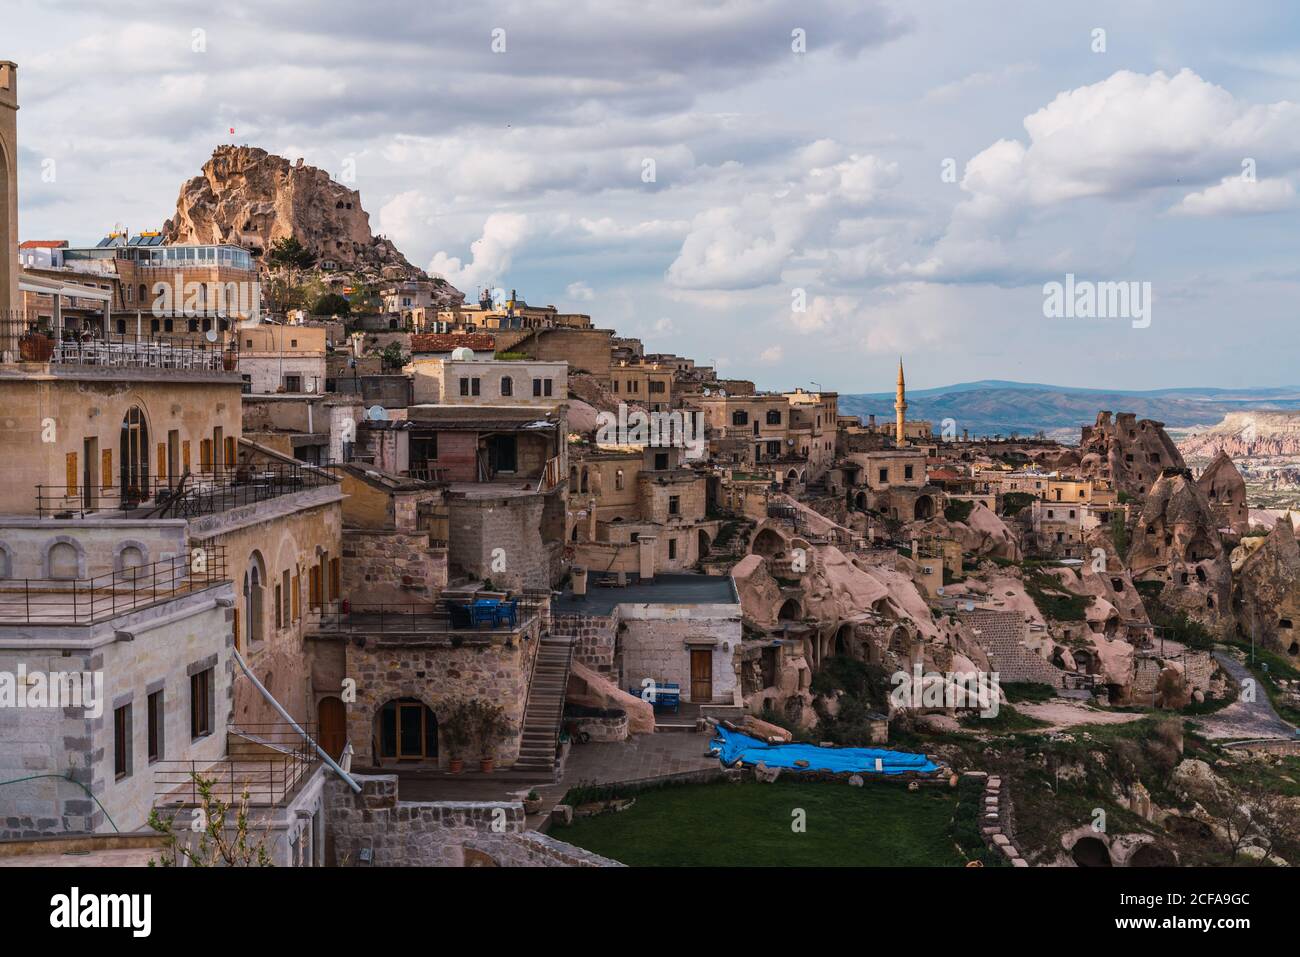 Shabby stone houses of old city located on rough mountain against cloudy sky of Cappadocia, Turkey Stock Photo